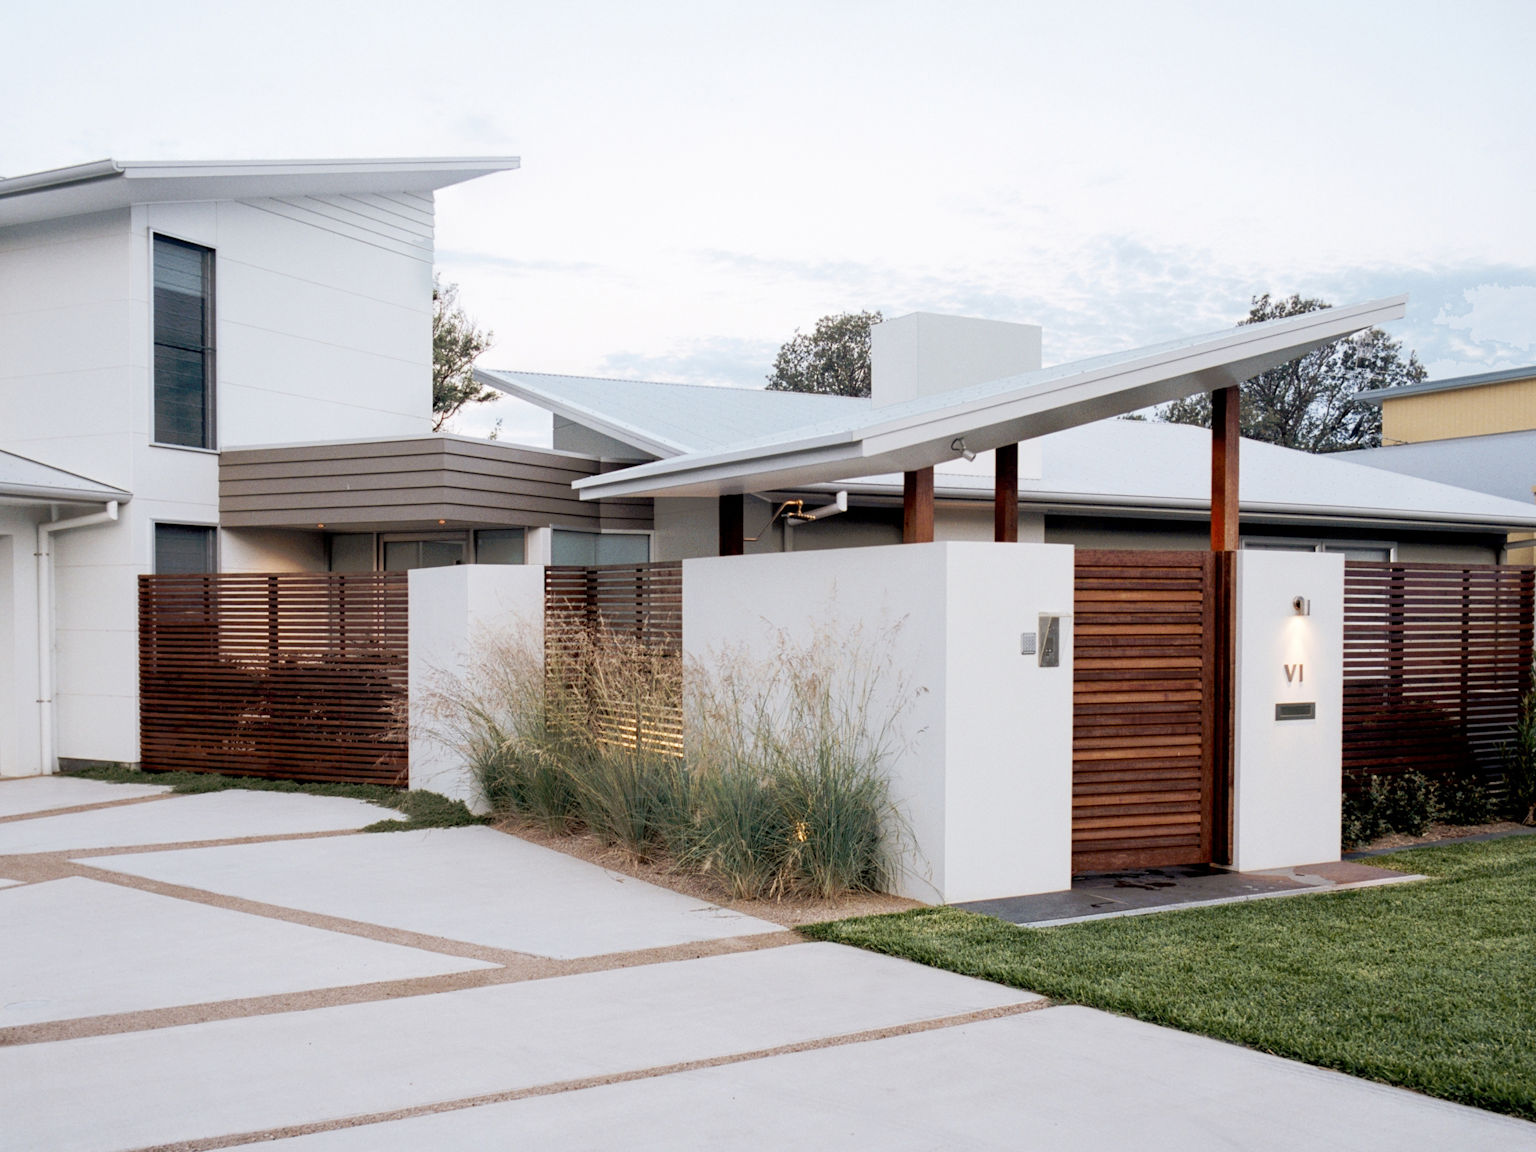 Contemporary residence with Exfoliated Buffalo granite pavers as front pathway (below gate)